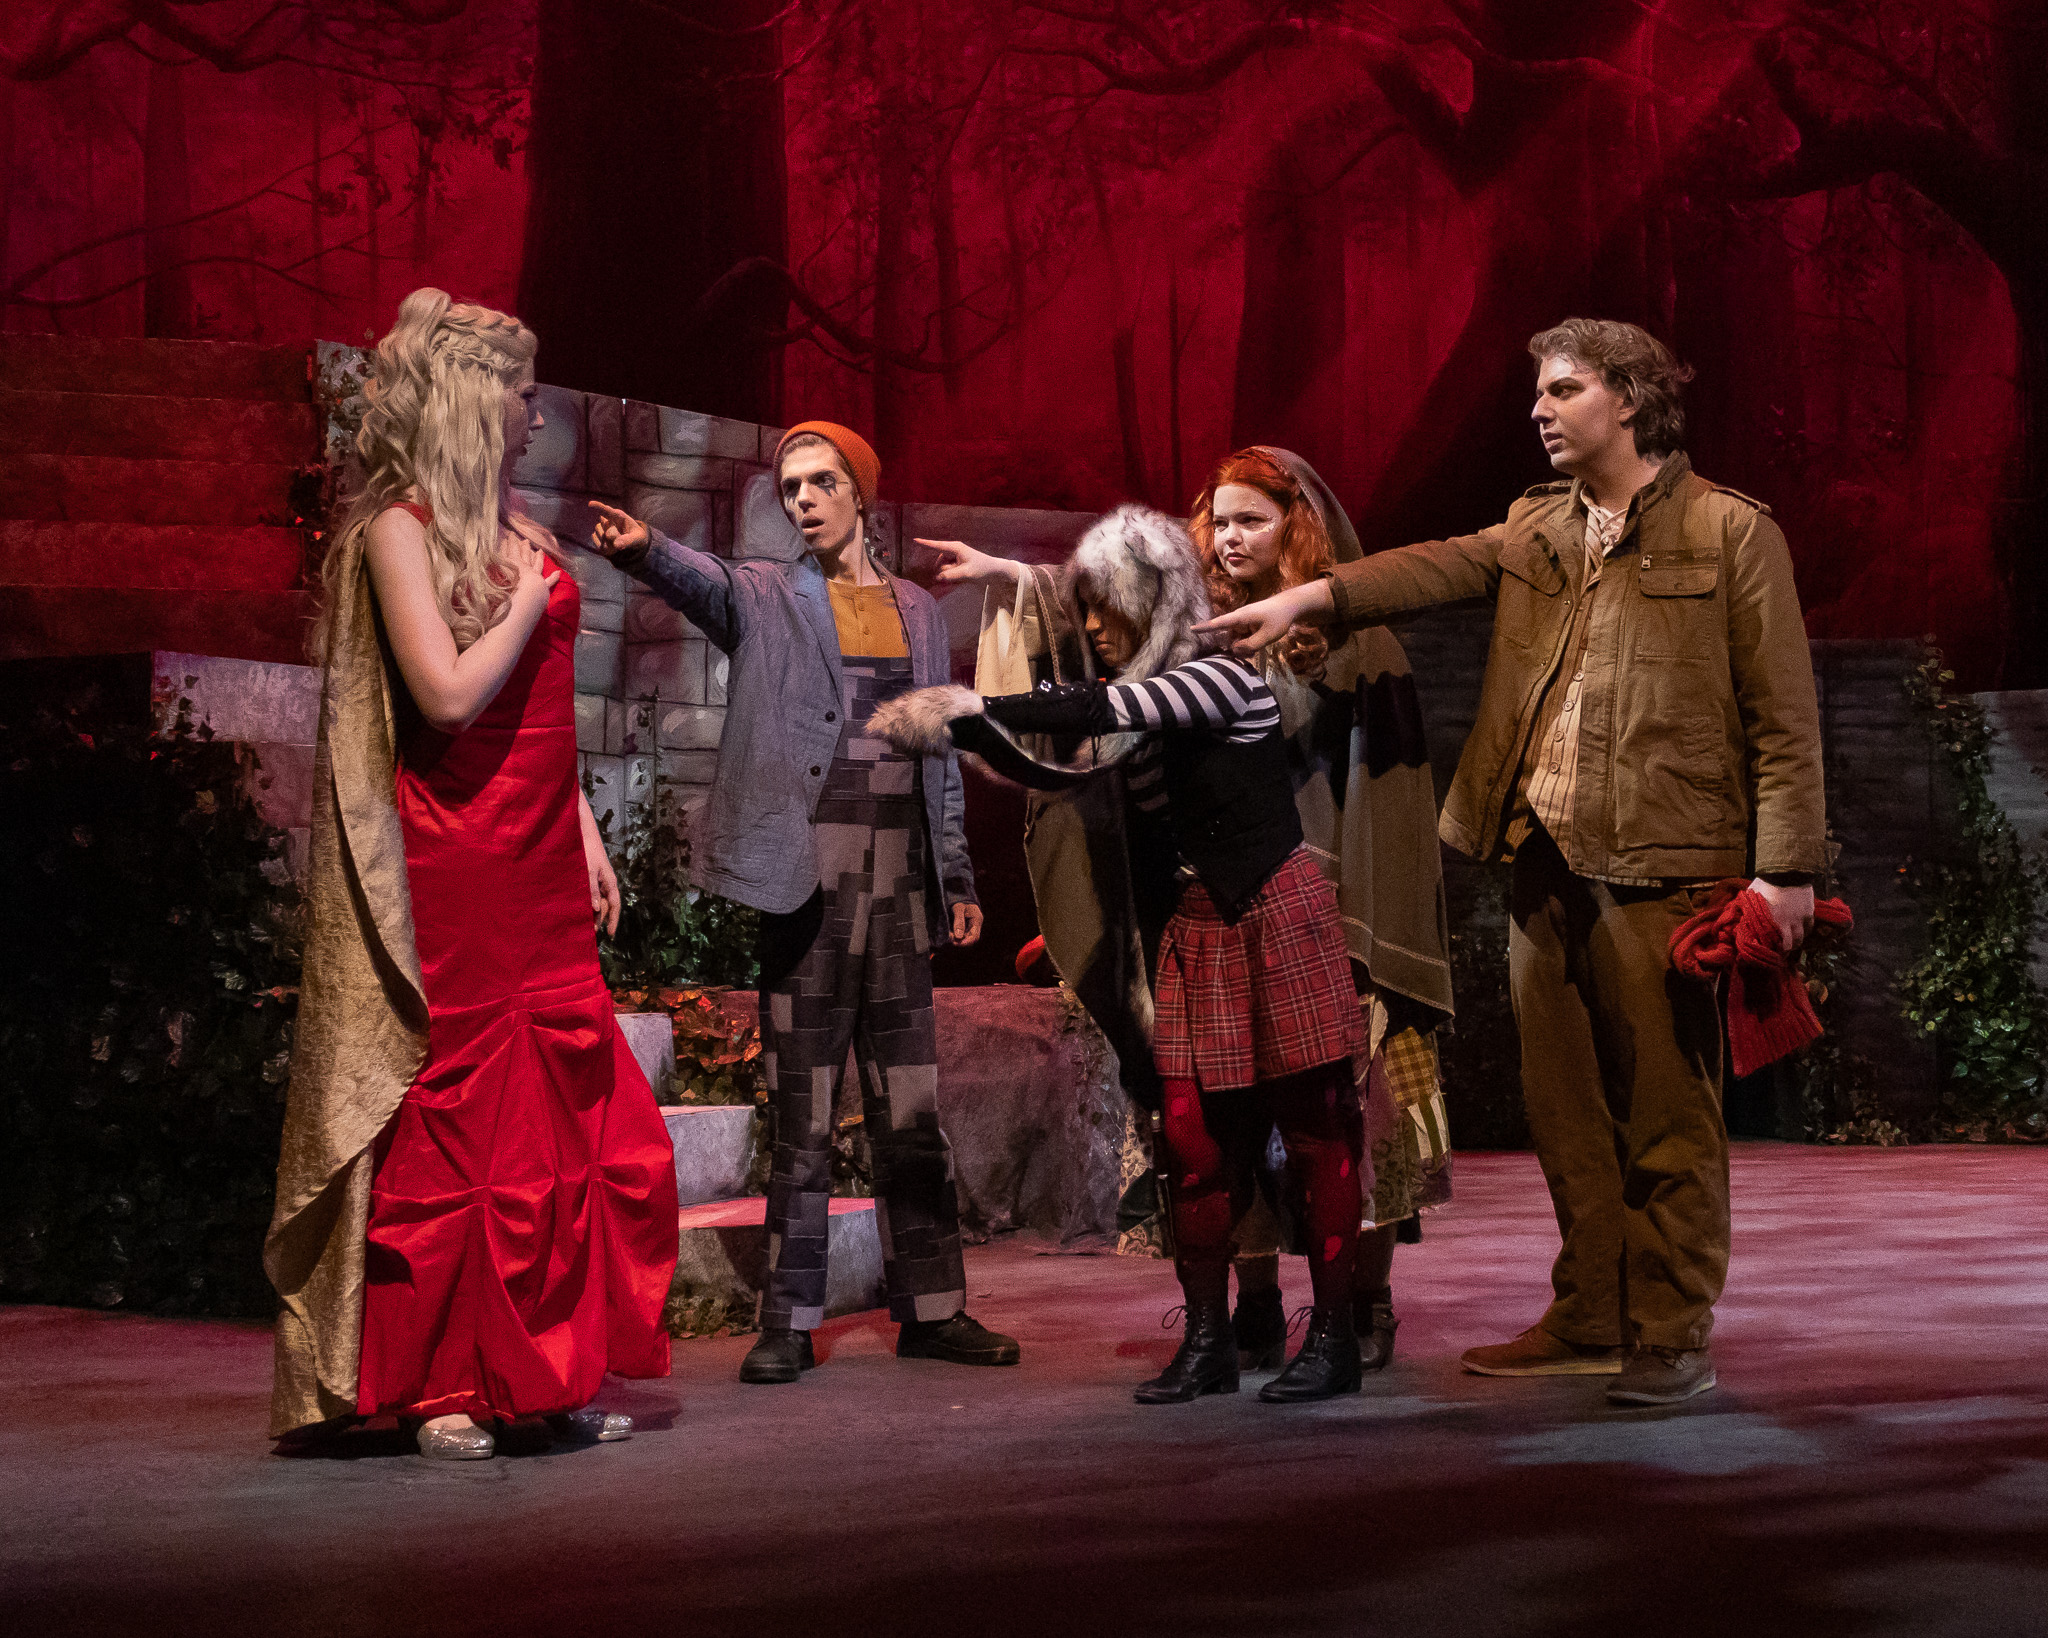 Into the woods website pic 1